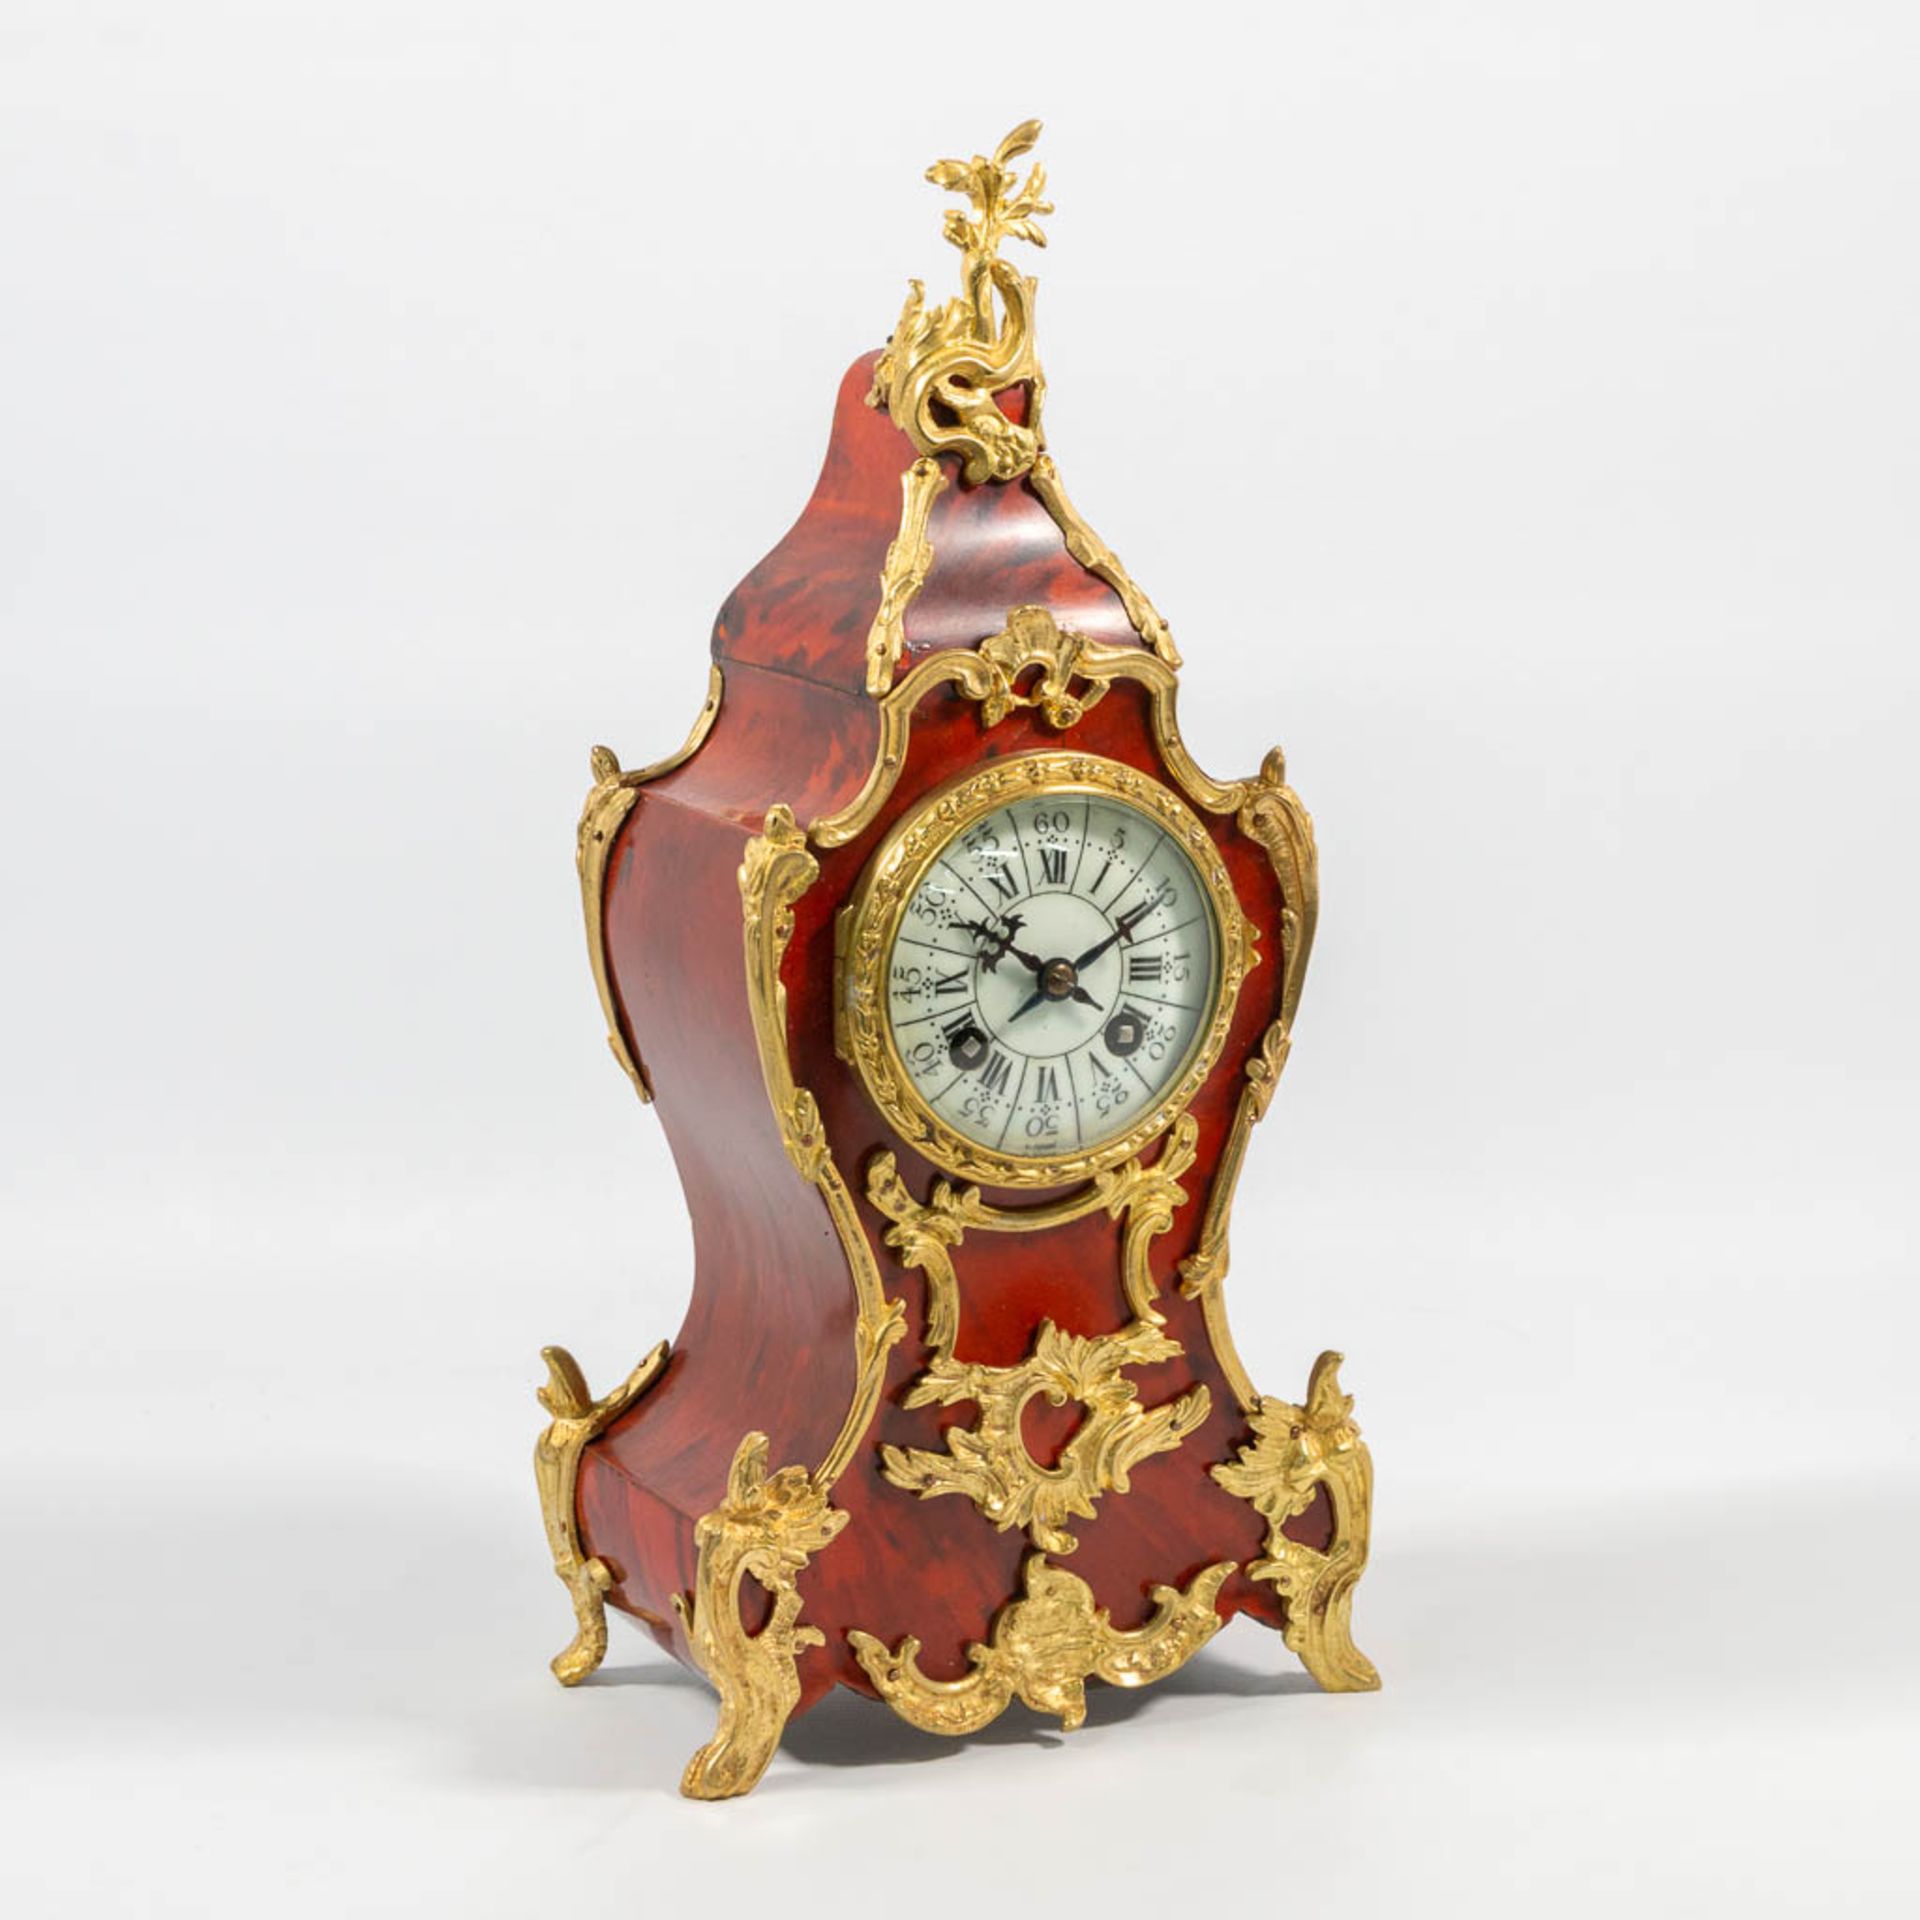 A Table clock made of wood decorated with Tortoise shell and Mount - Image 8 of 16